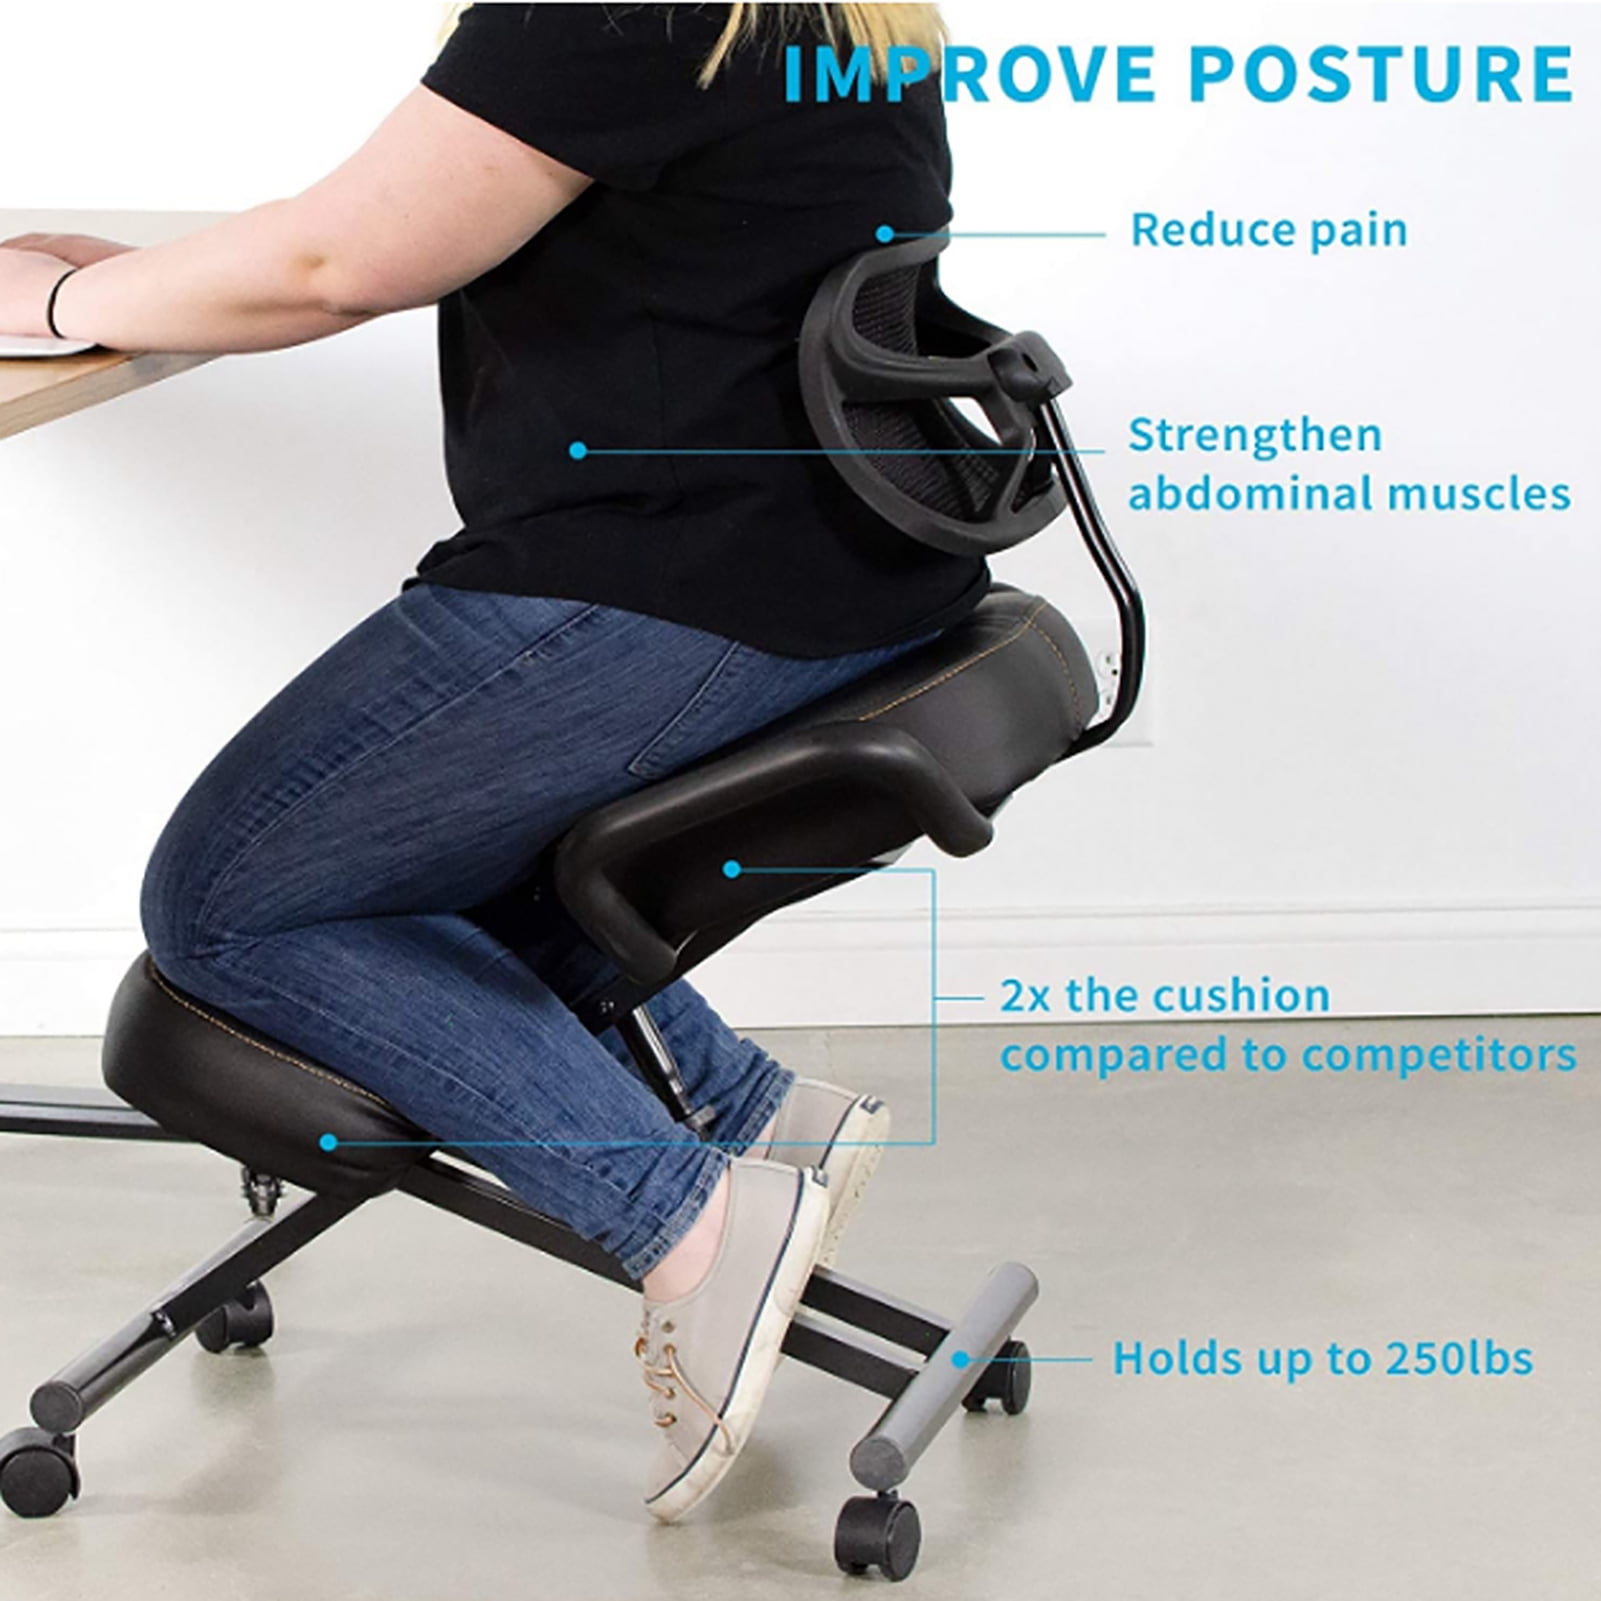 8AM Office 8AM-OF-3013 Thatsit Balans Adjustable Ergonomic Kneeling Chair with Backrest (Red Revive Fabric with Natural Base)